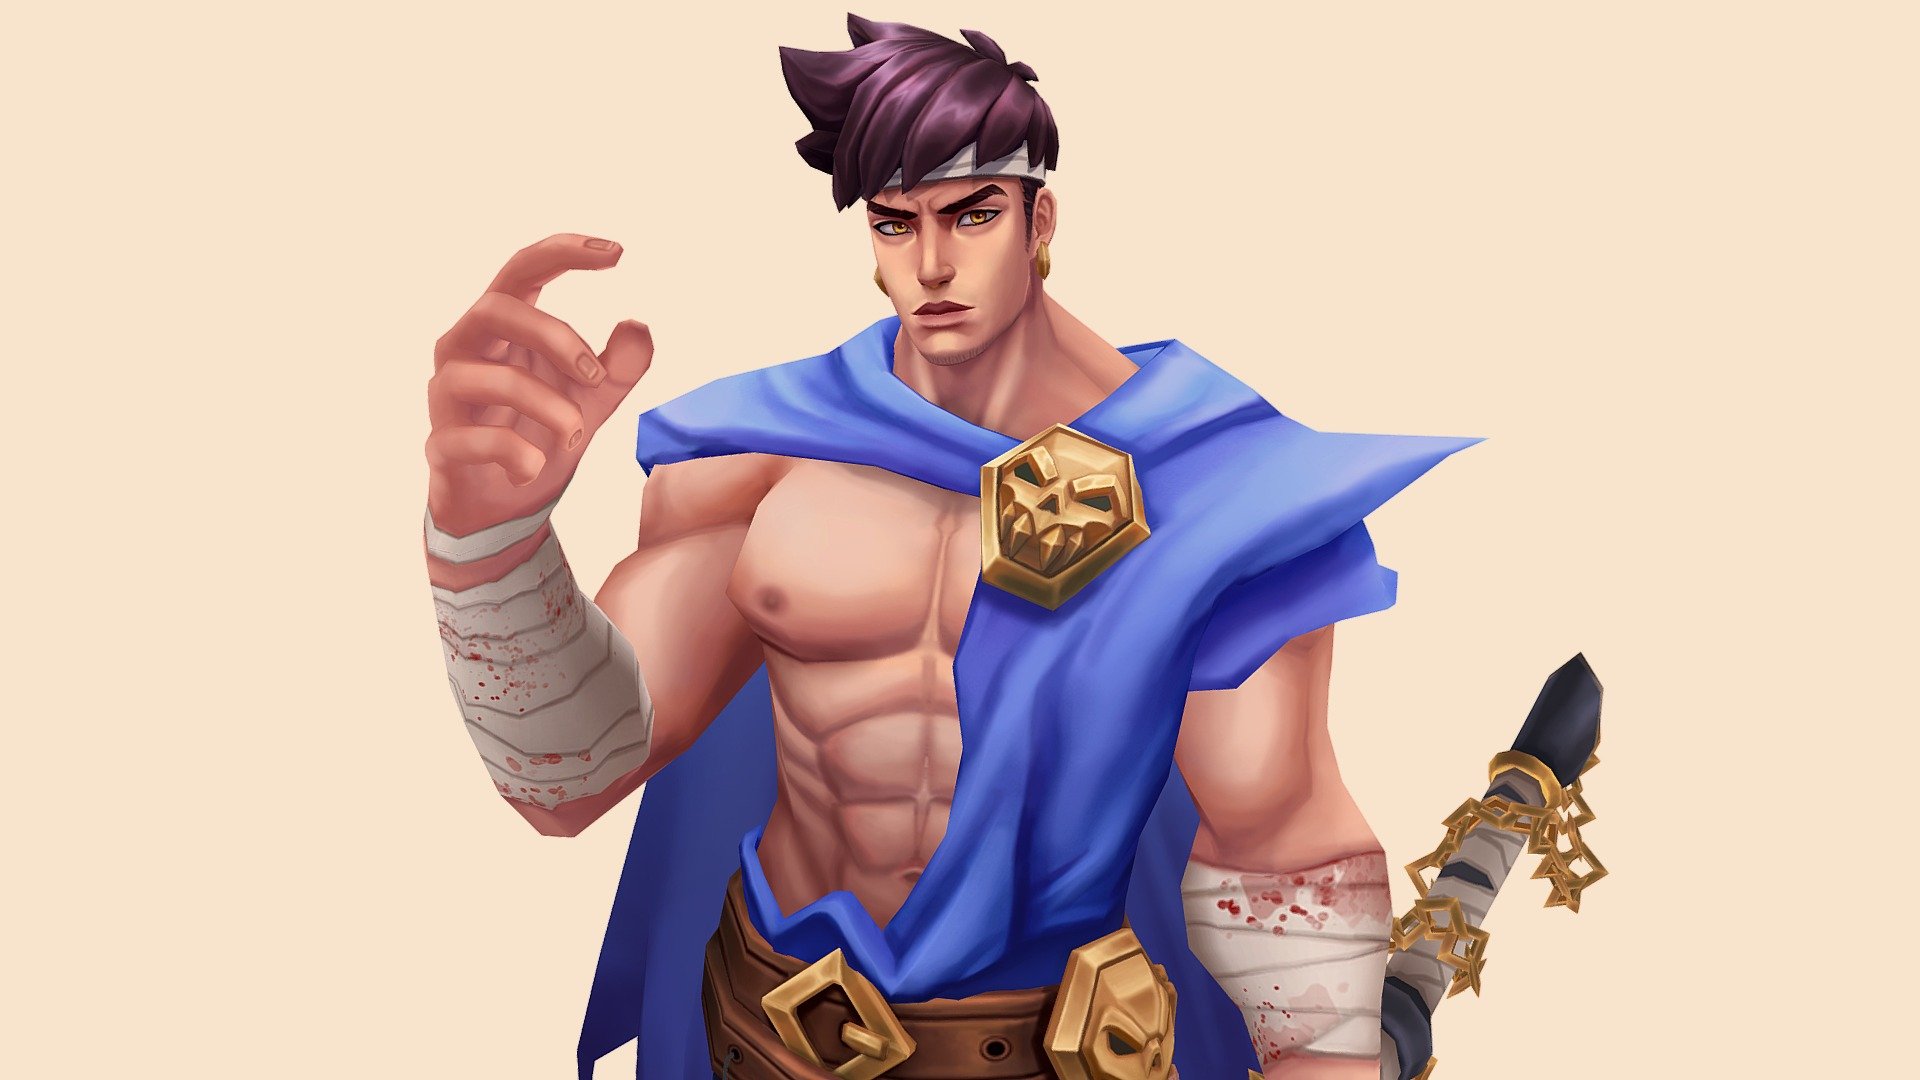 Another handpainted character that I've worked on!
Concept by Jaryn Chan! https://www.artstation.com/artwork/3q5xvD - Jian the Berserker - 3D model by Andrea (@And101) 3d model